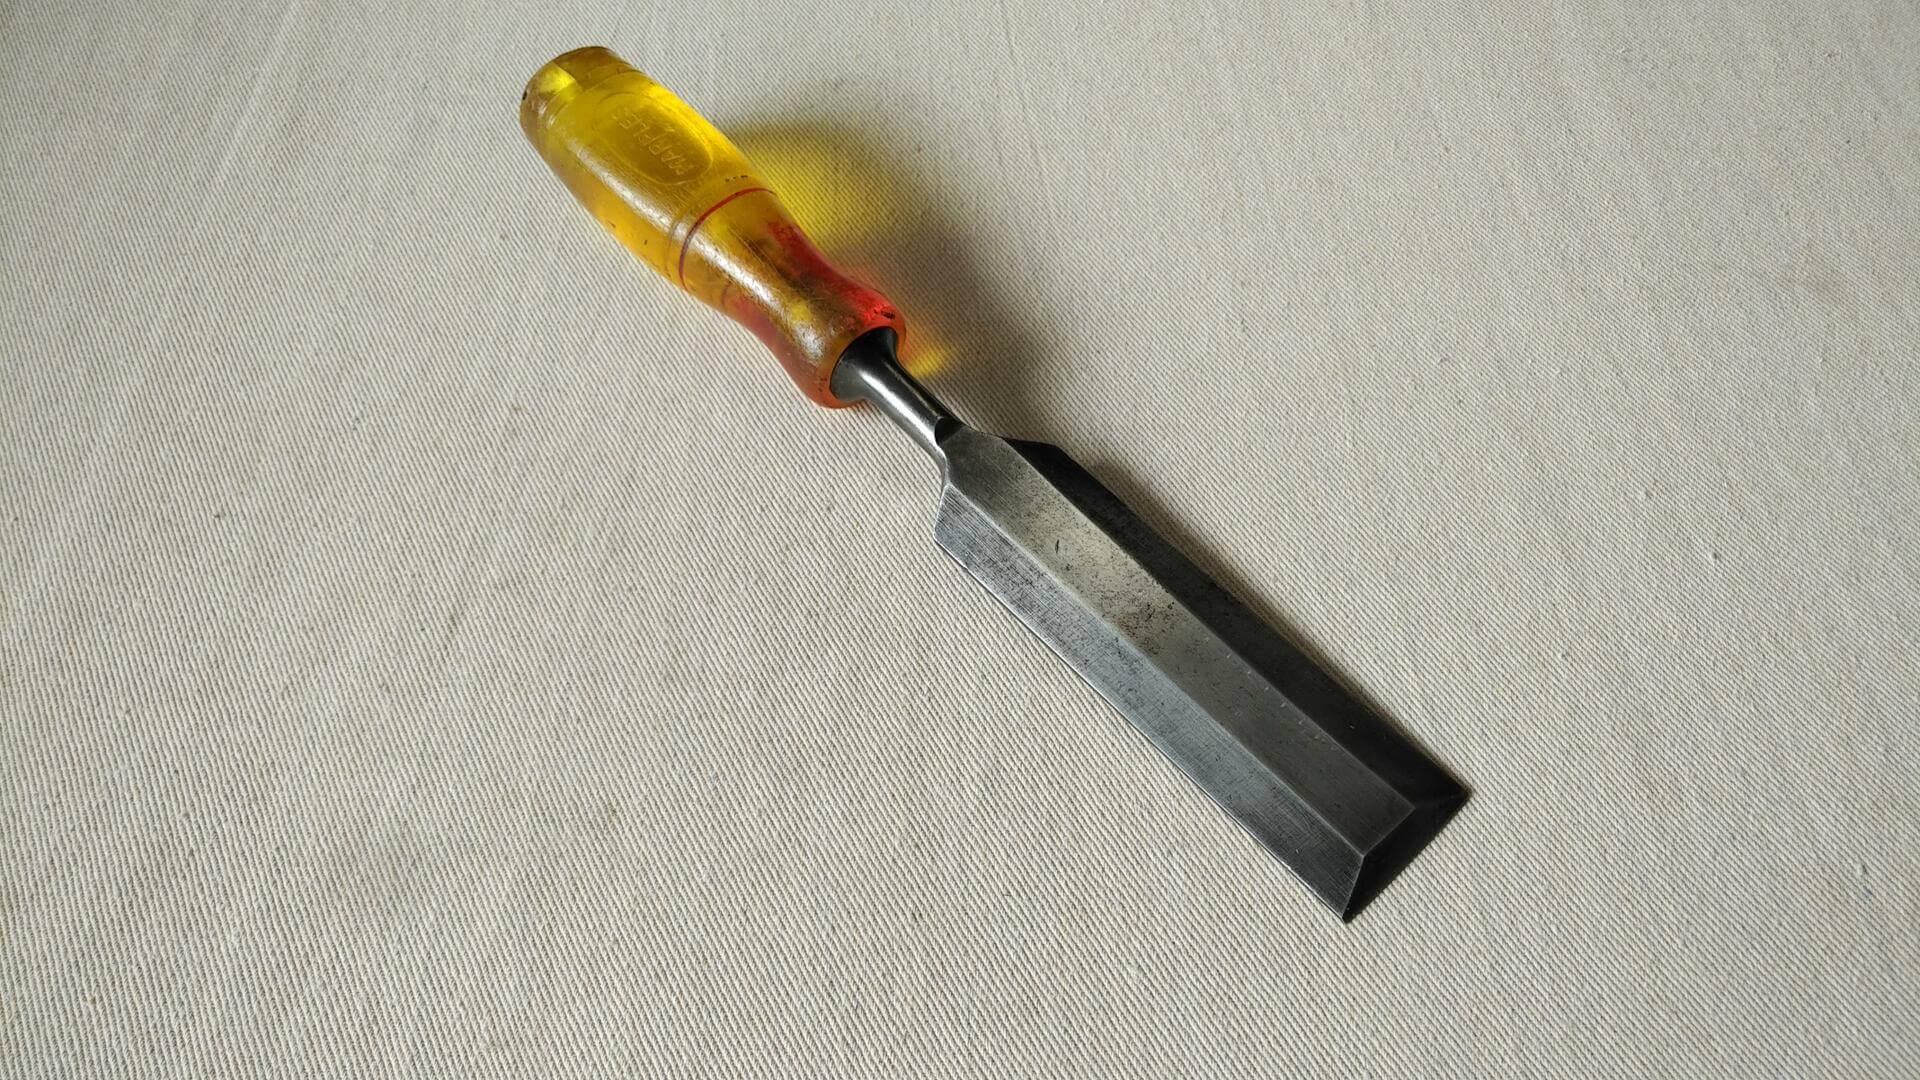 Vintage WM Marples and Sons 1 1/4″ tang chisel with the Shamrock trade mark. Antique made in Sheffield England collectible carpentry and woodworking tools